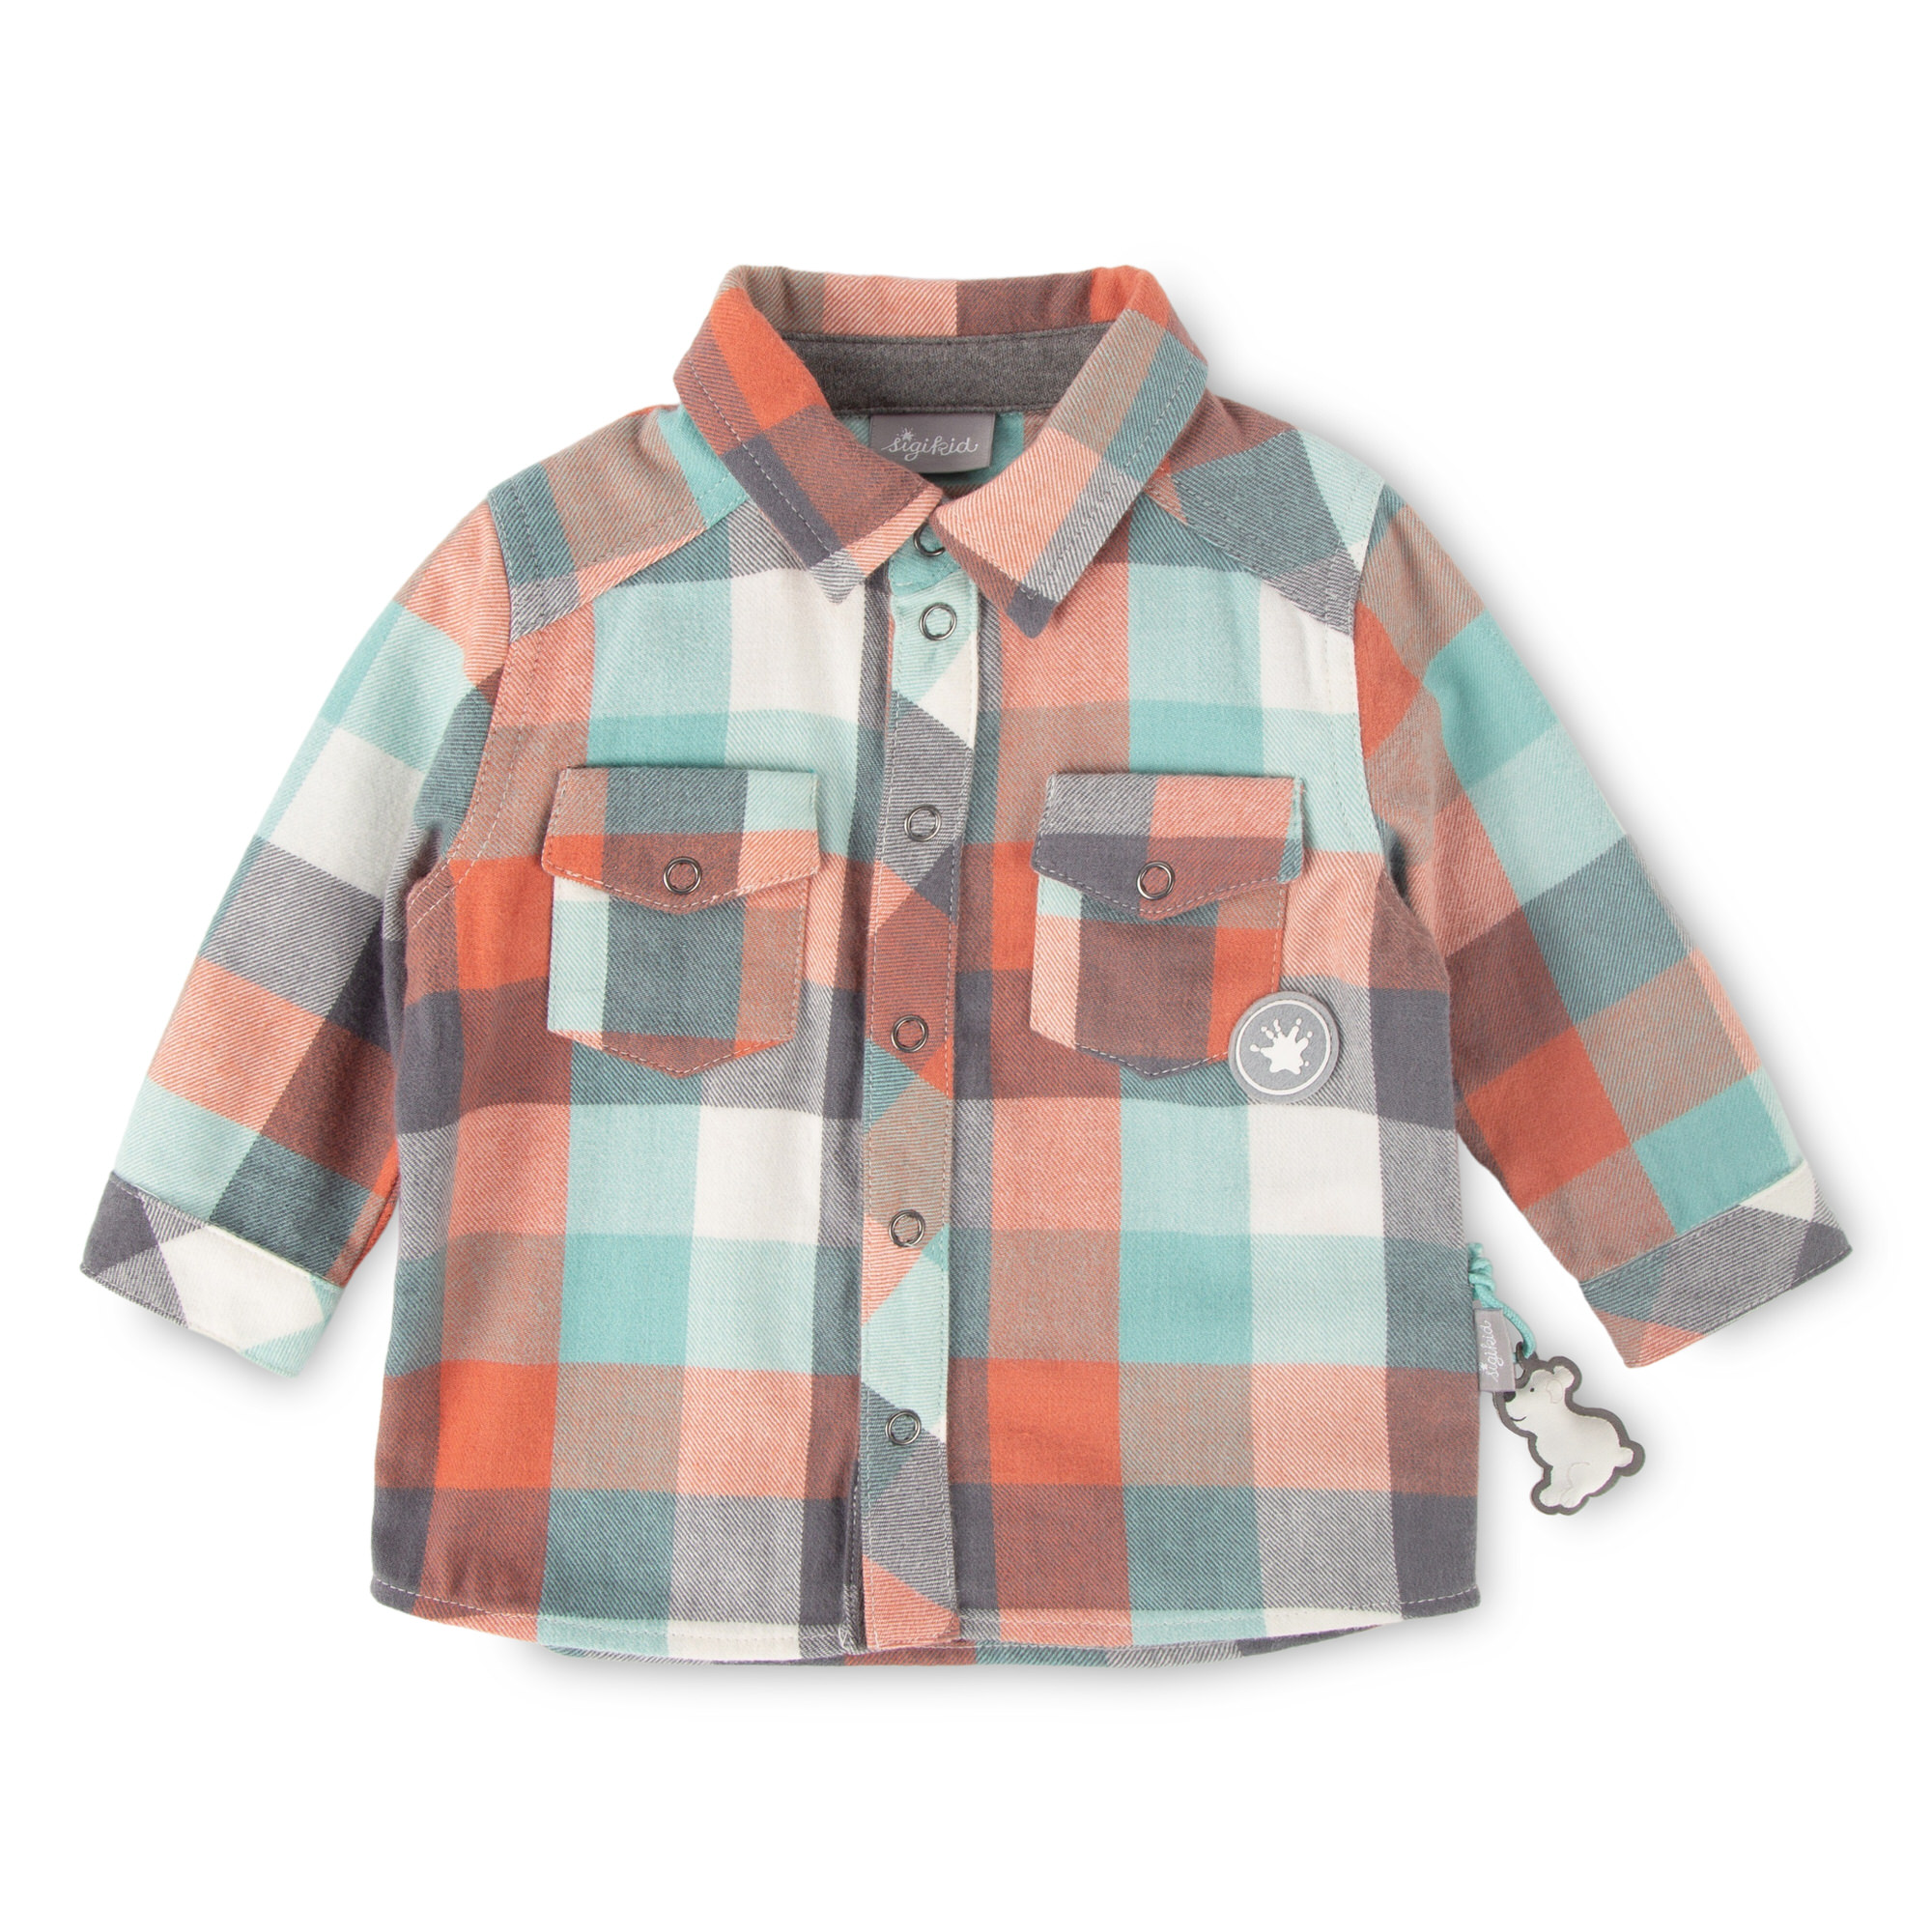 Baby long sleeve flannel shirt with pockets, plaid